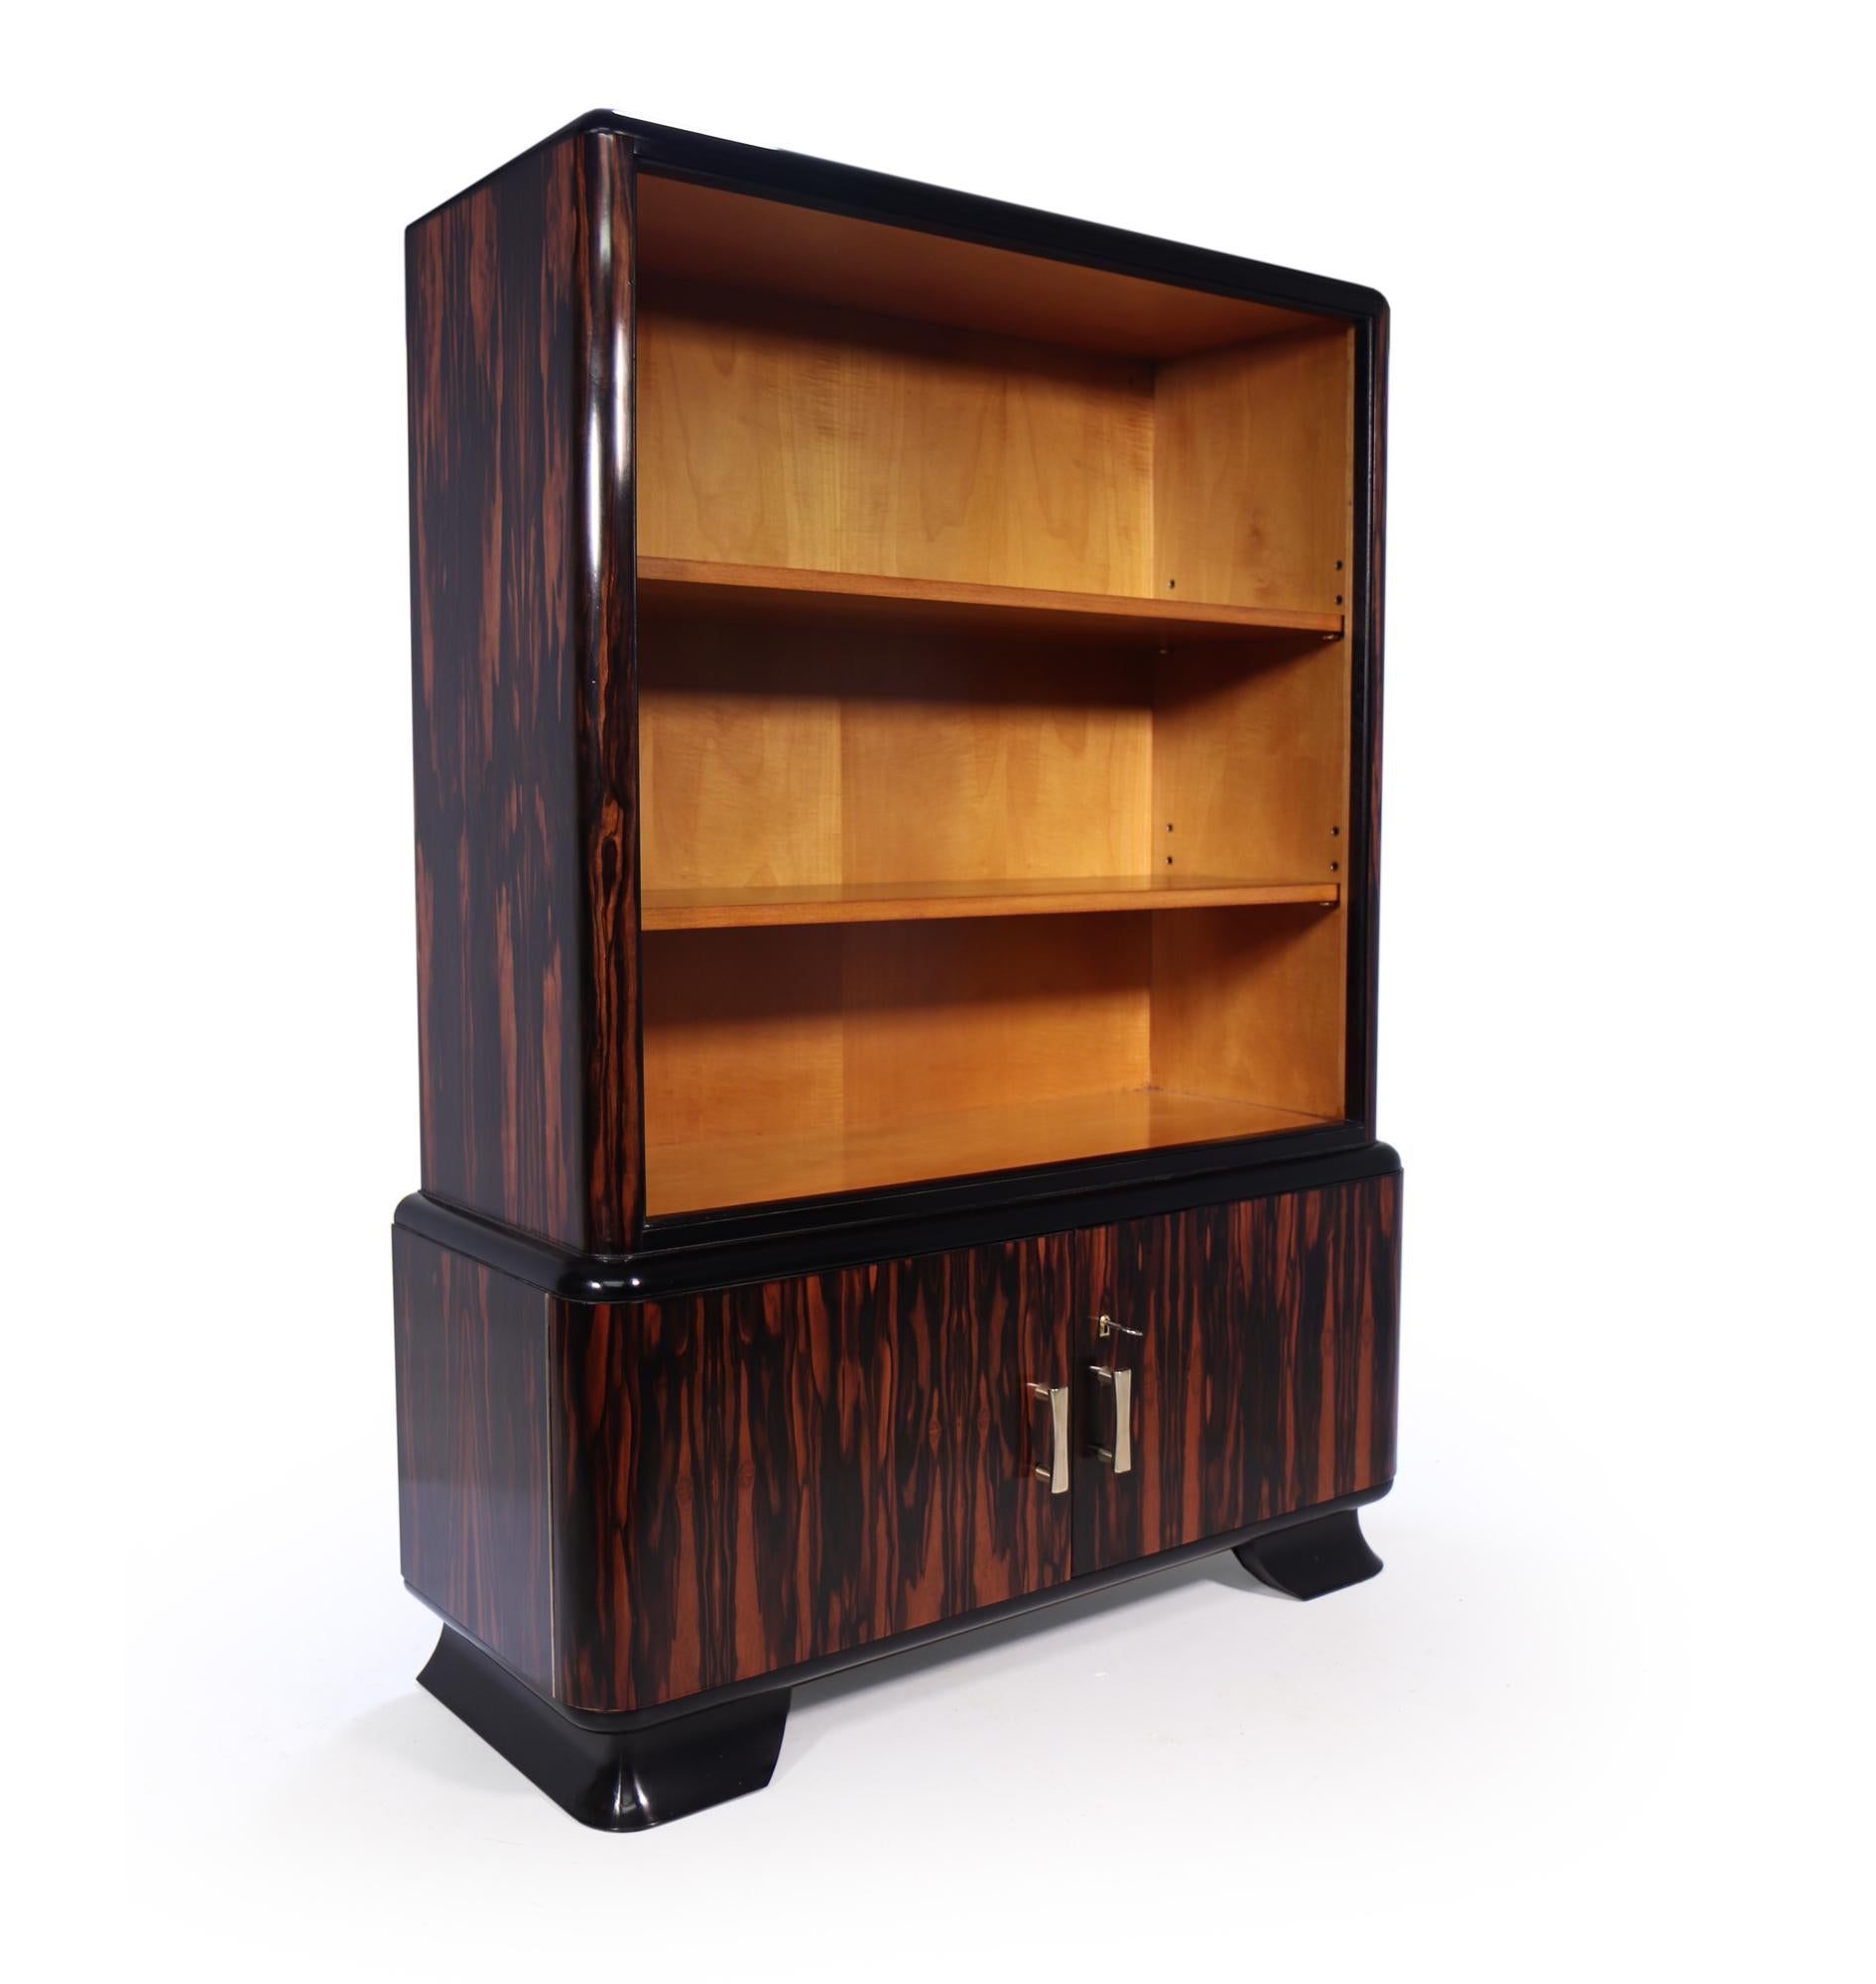 A very attractive open bookcase in macassar ebony with lockable cupboard below, two adjustable height shelves rounded corners and polished bronze handles the cabinet is excellent quality and has been fully re finished to a very high standard makers